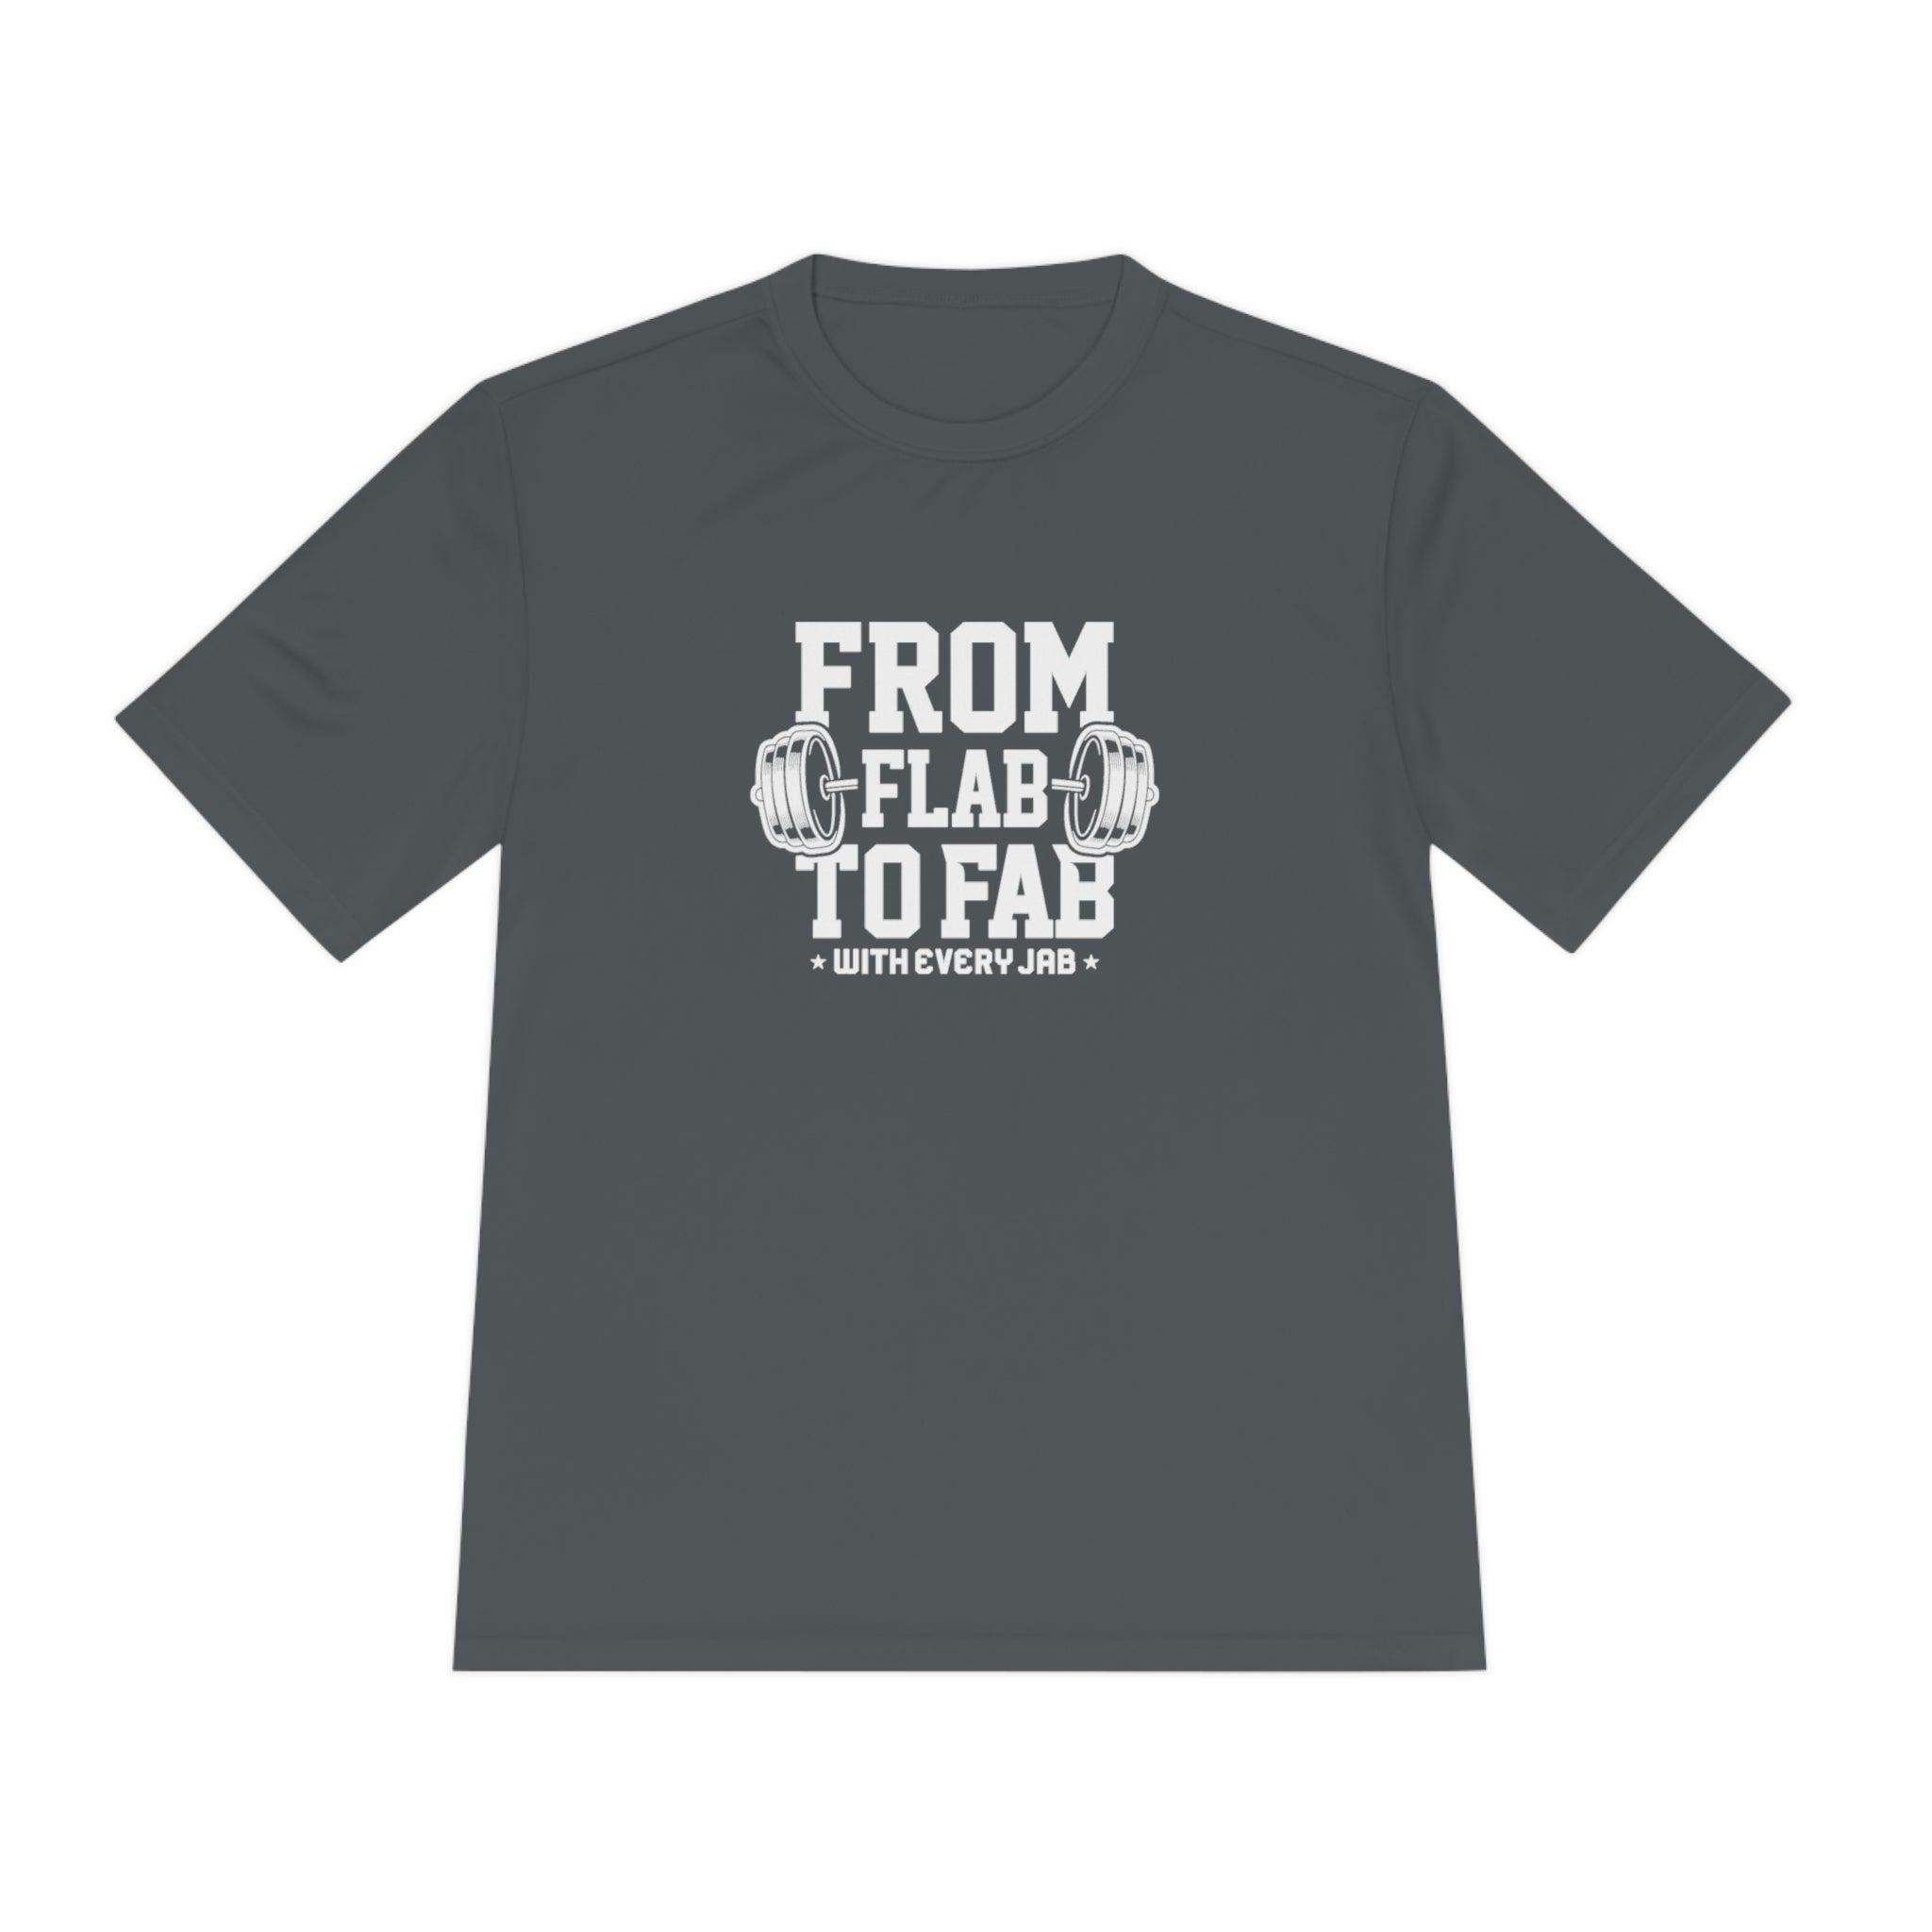 Unisex Moisture Wicking Tee "From Flab to Fab - With Every Jab"